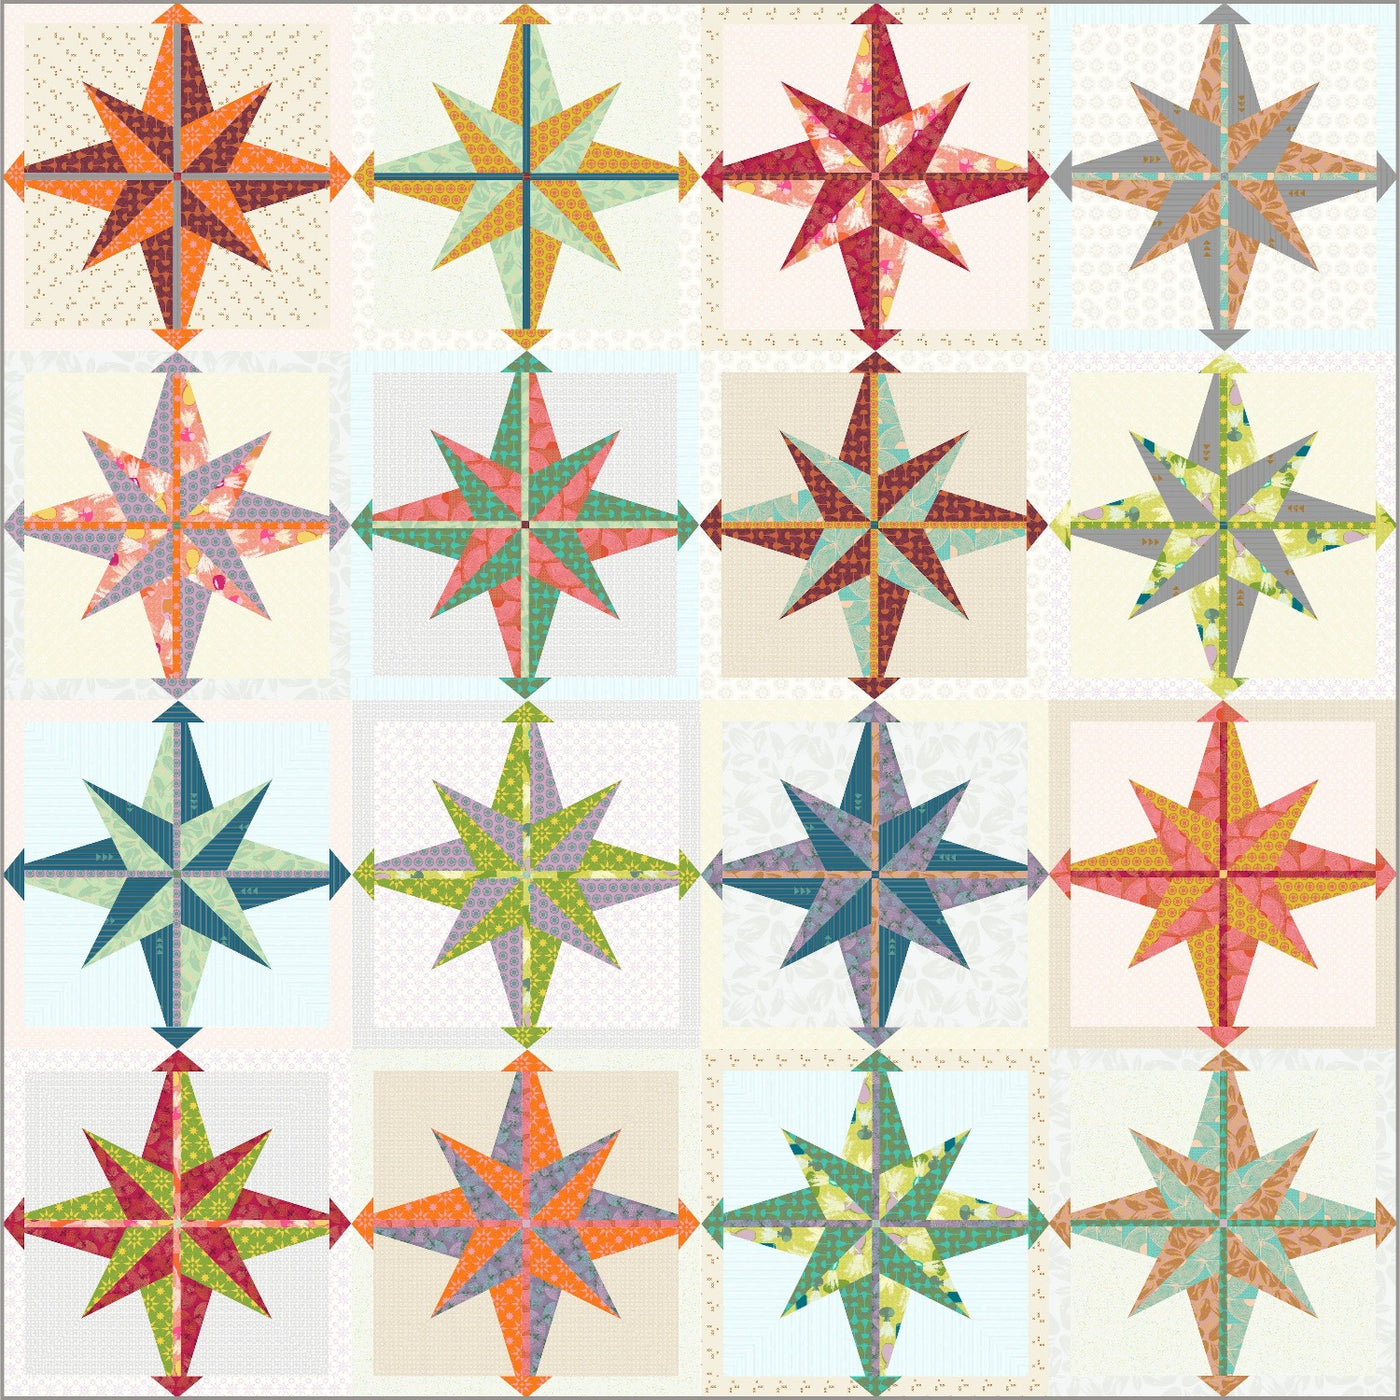 Double Starburst Pattern by Sew Kind of Wonderful